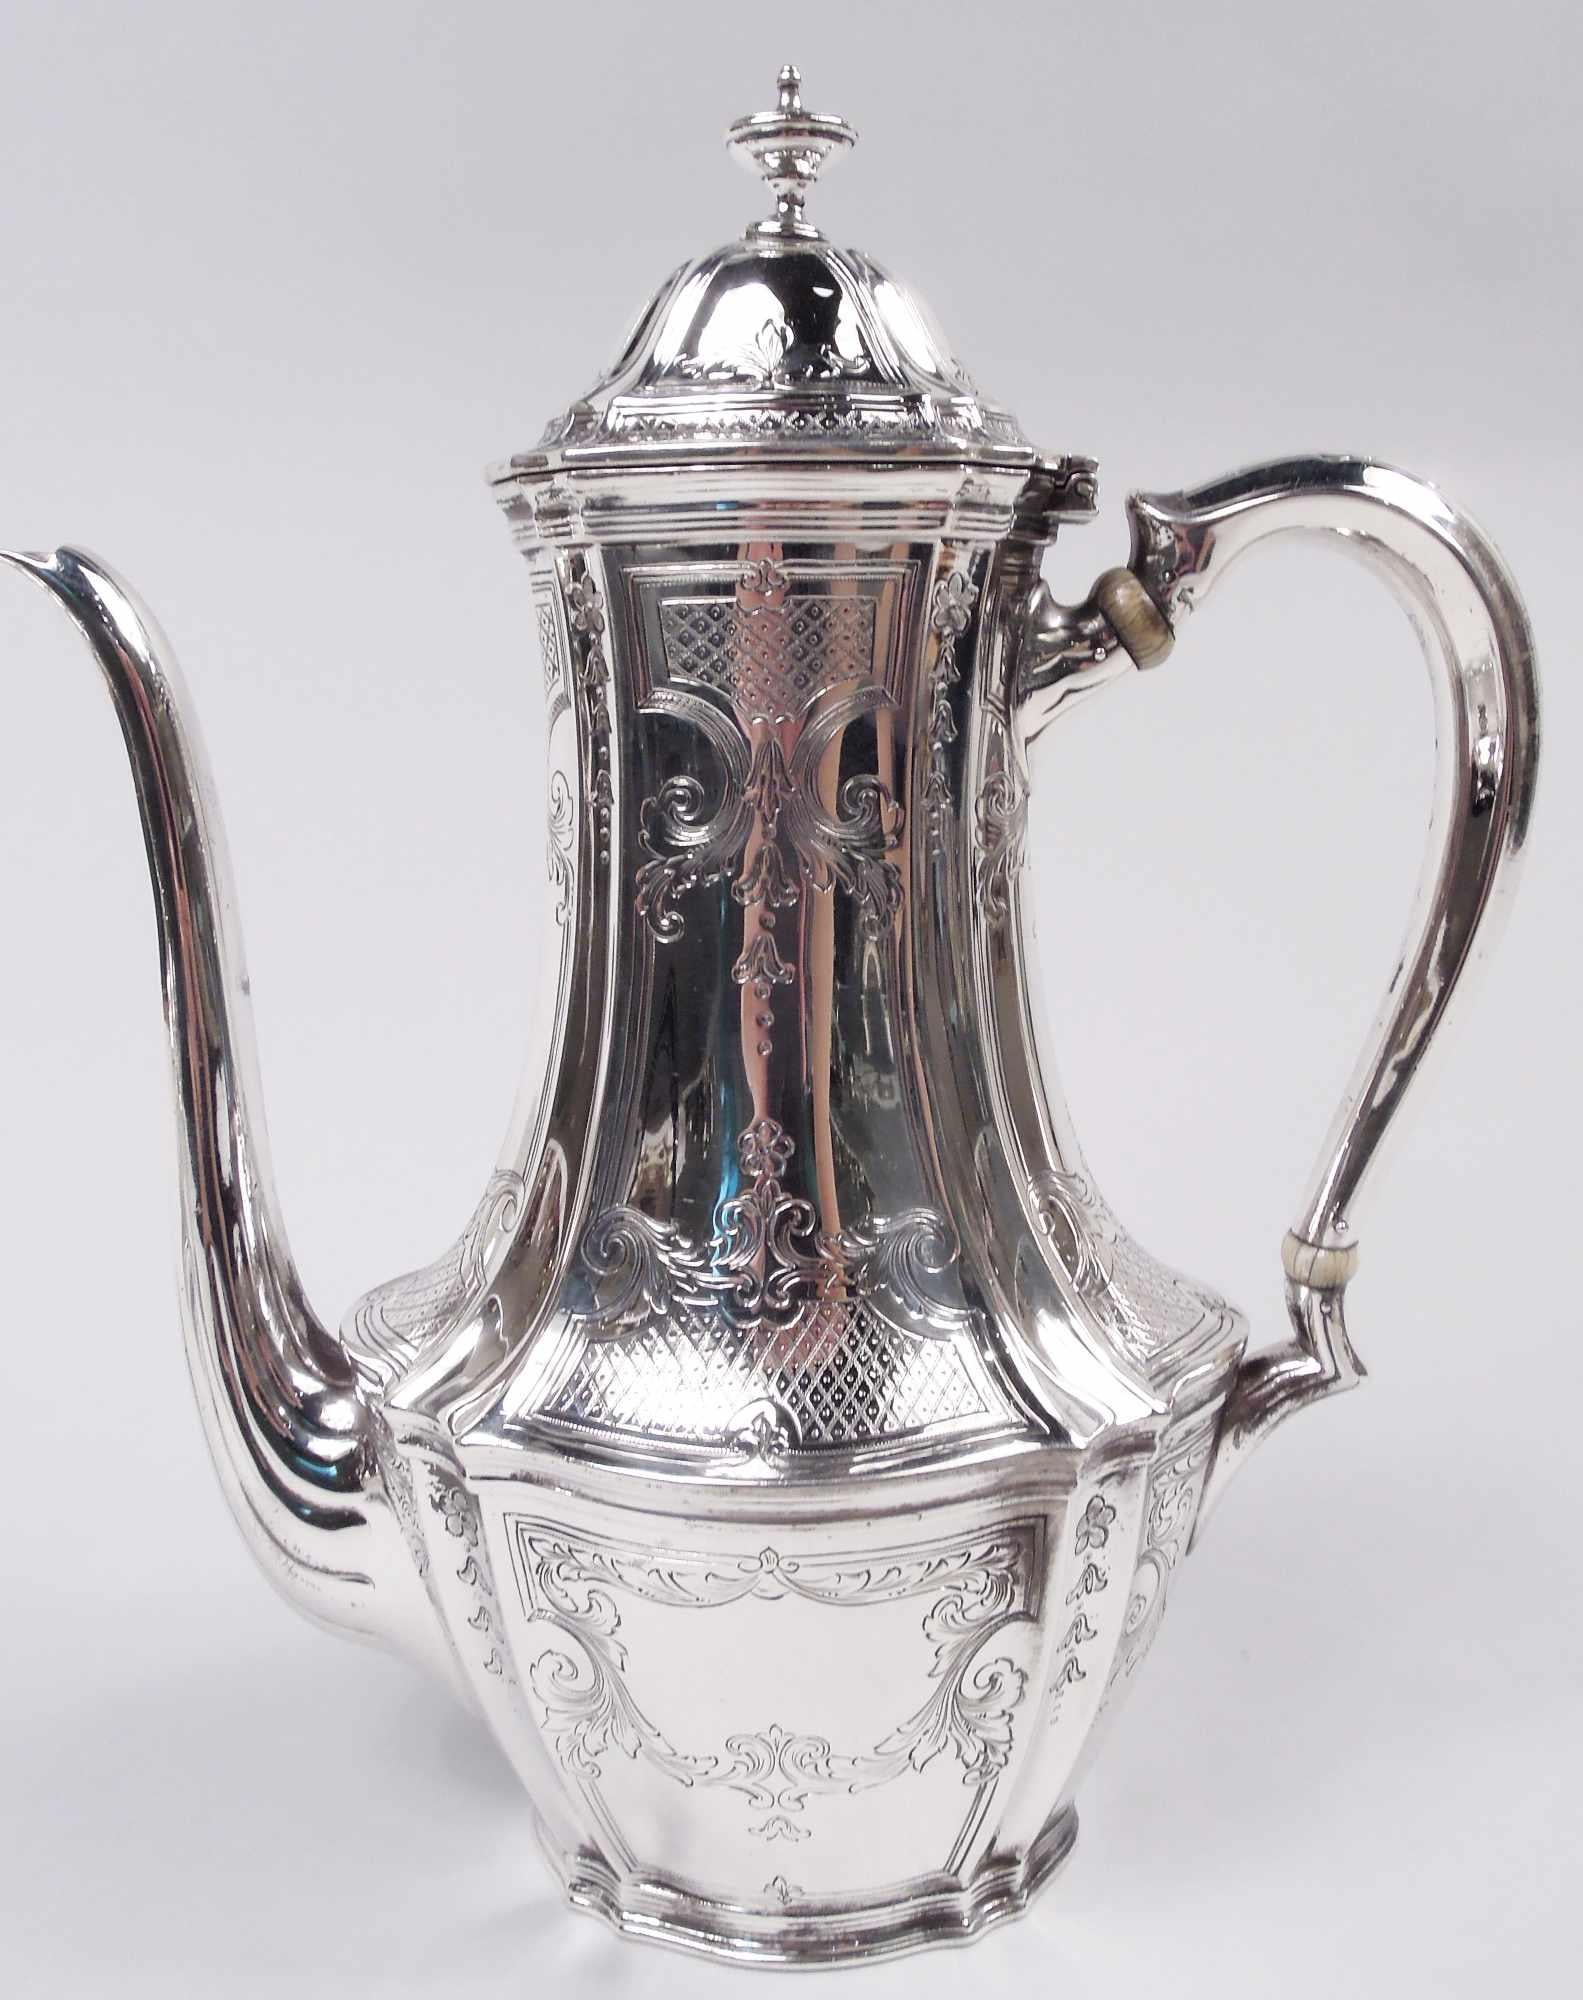 Edwardian Classical sterling silver coffee set on tray. Made by Tiffany & Co. in New York, ca 1921. This set comprises coffeepot, creamer, and sugar on tray. Each: Fluted ovoid body on same foot. Covered domed with vasiform finial. Handles capped